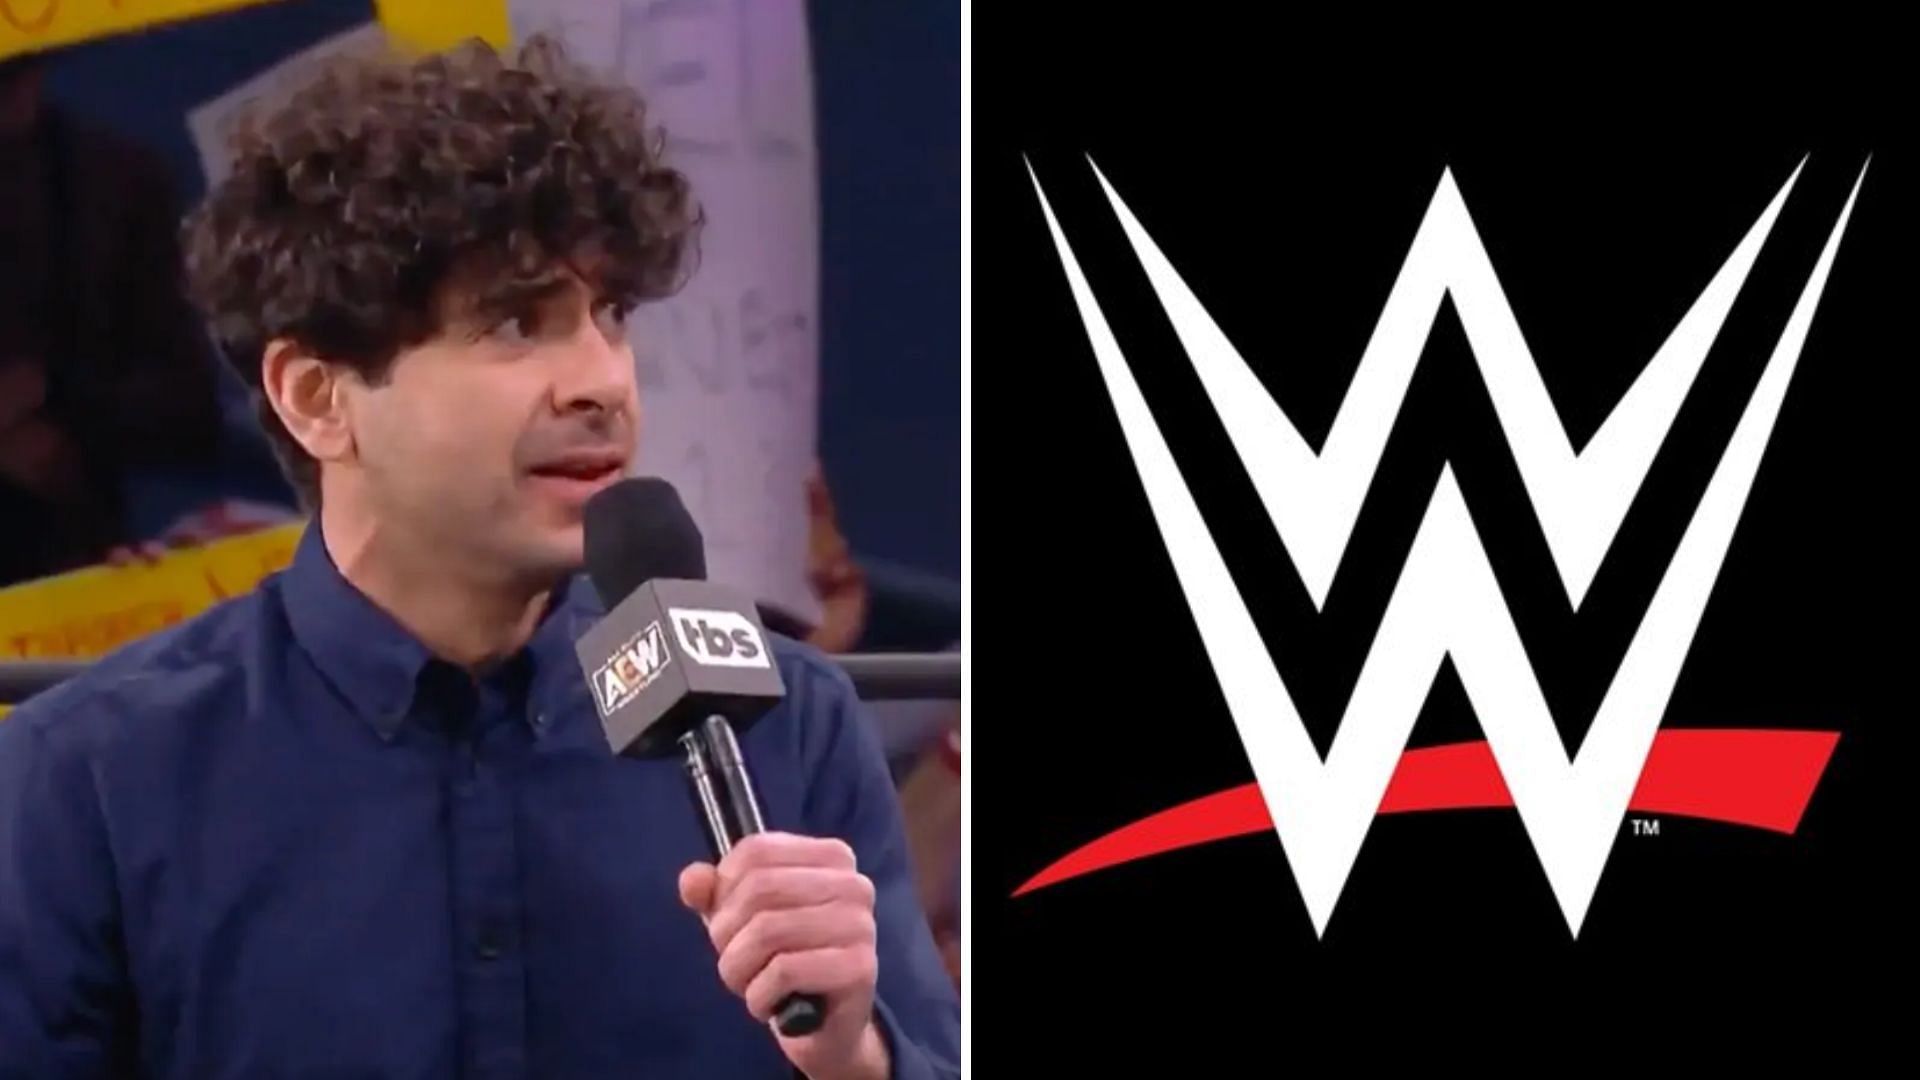 Tony Khan is the founder and Owner of AEW